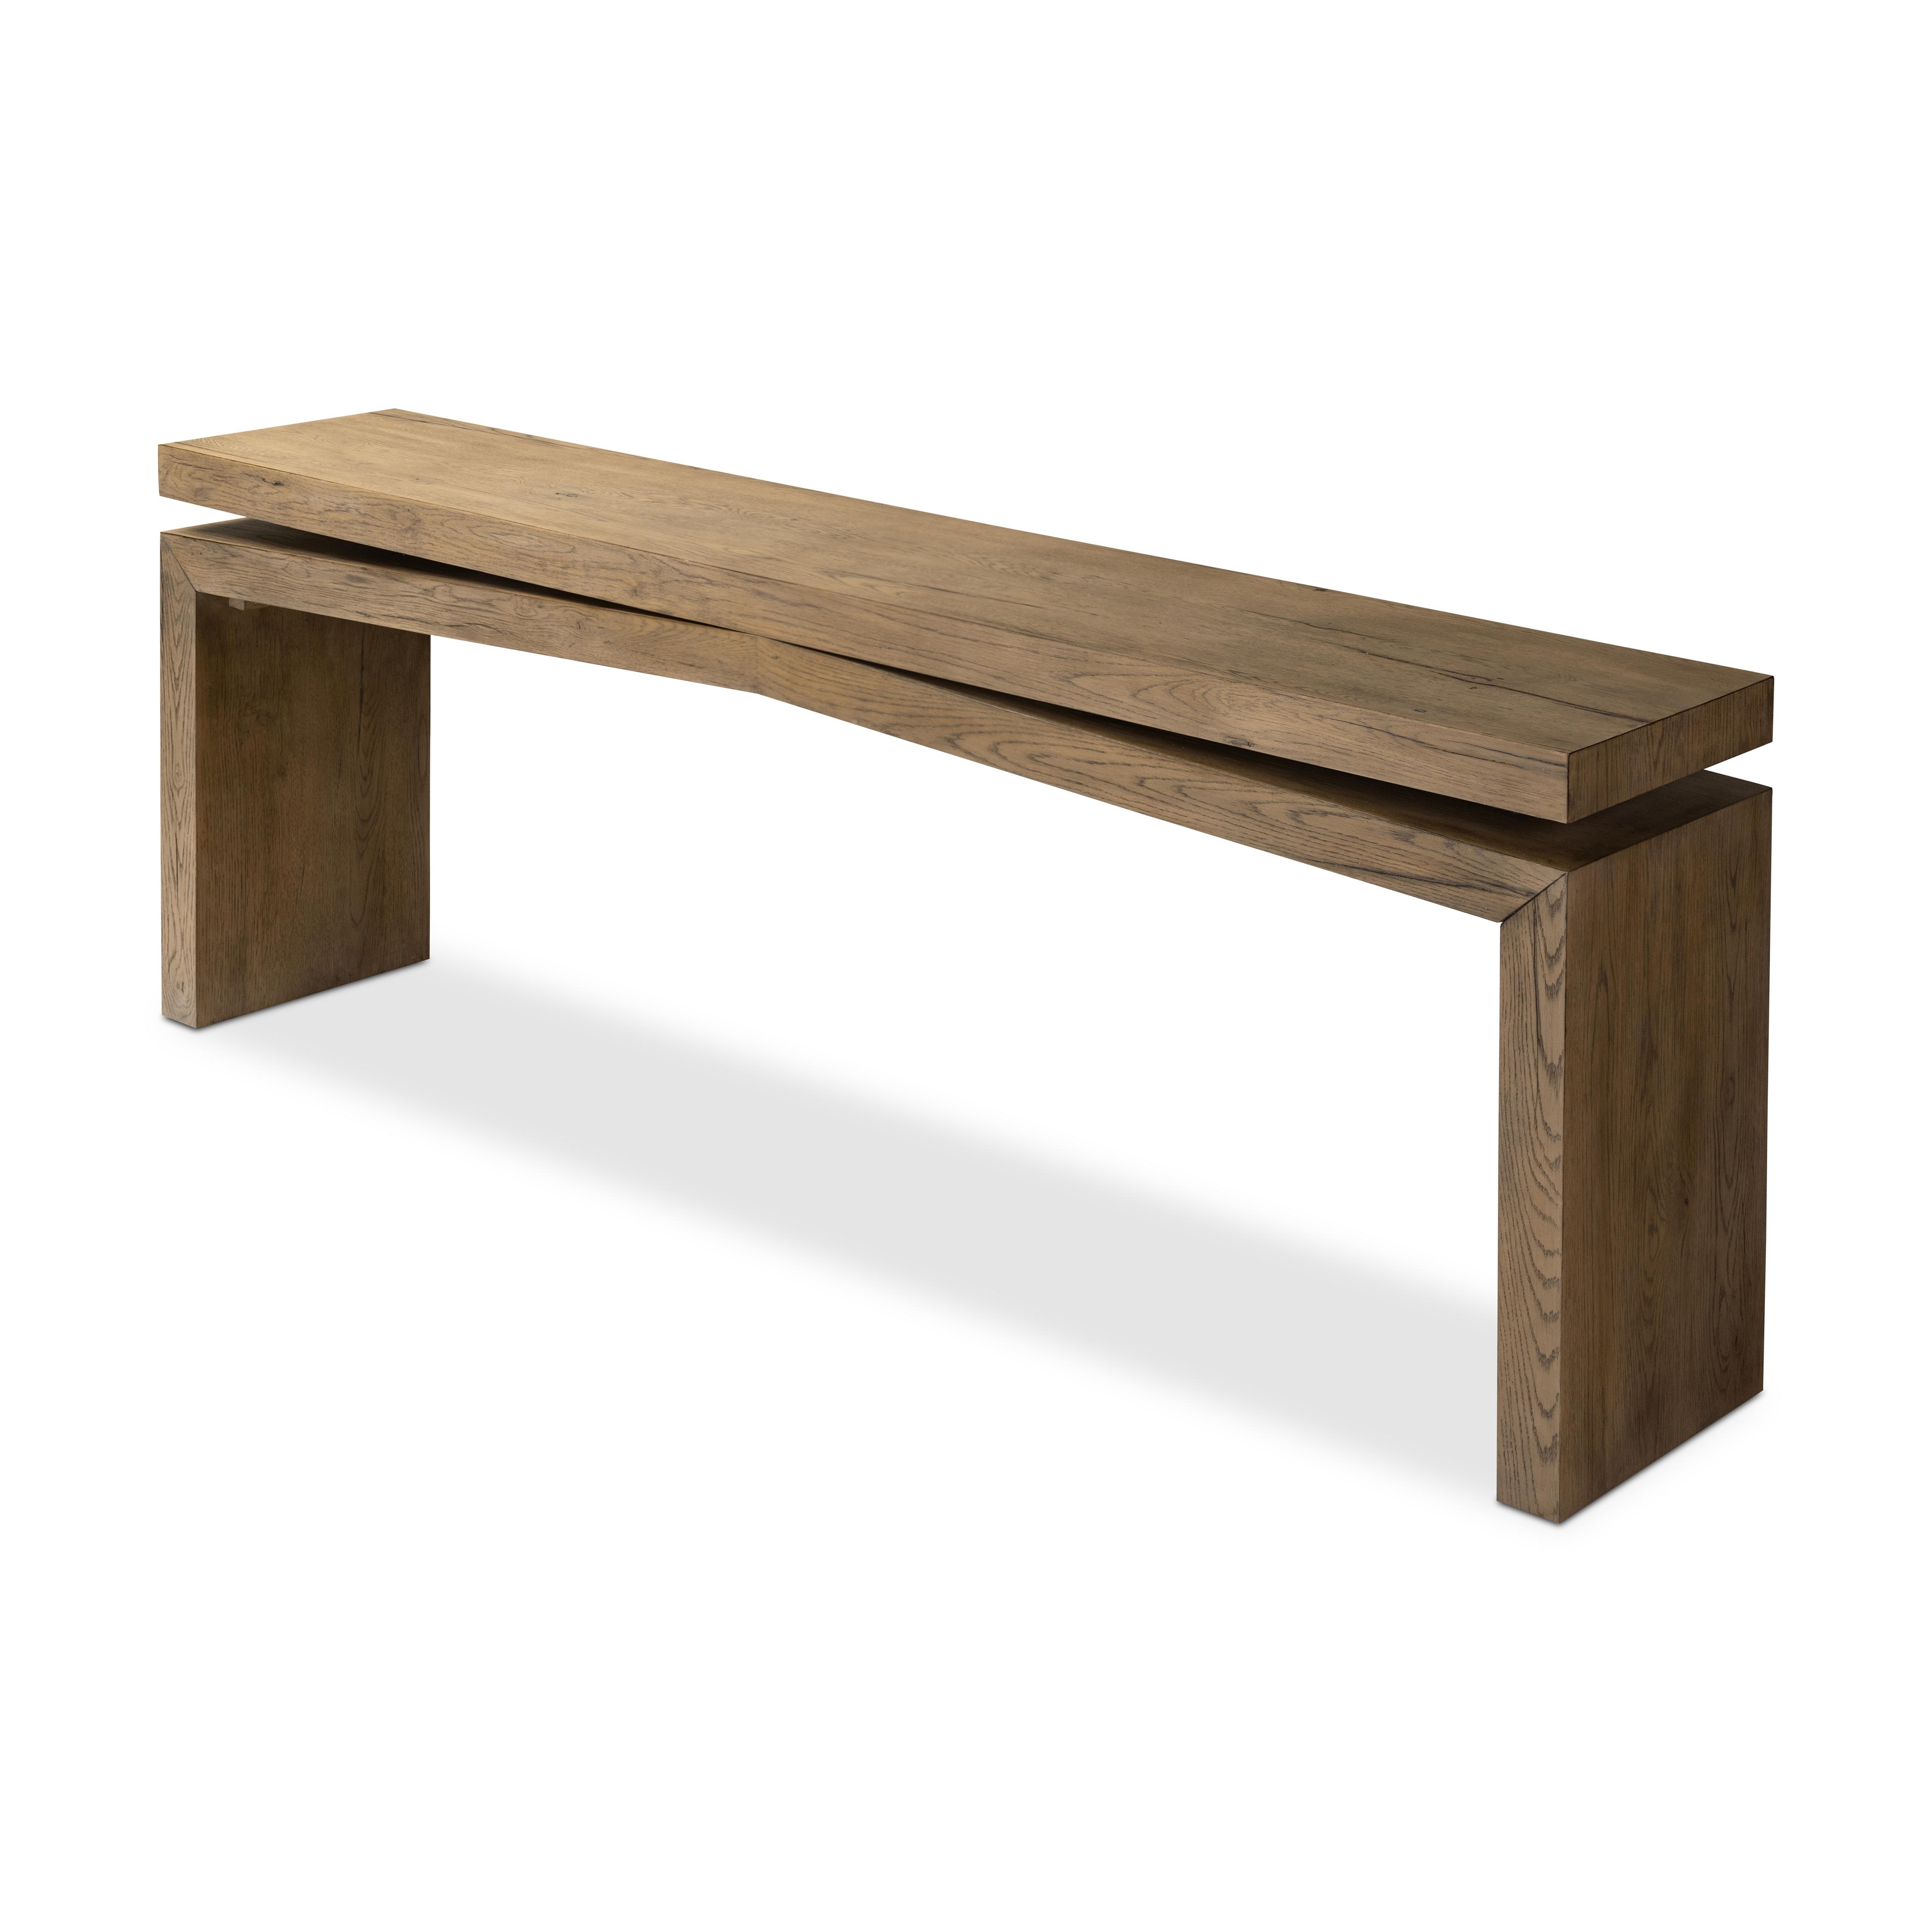 Matthes Console Table-Rustic Natural - Image 11